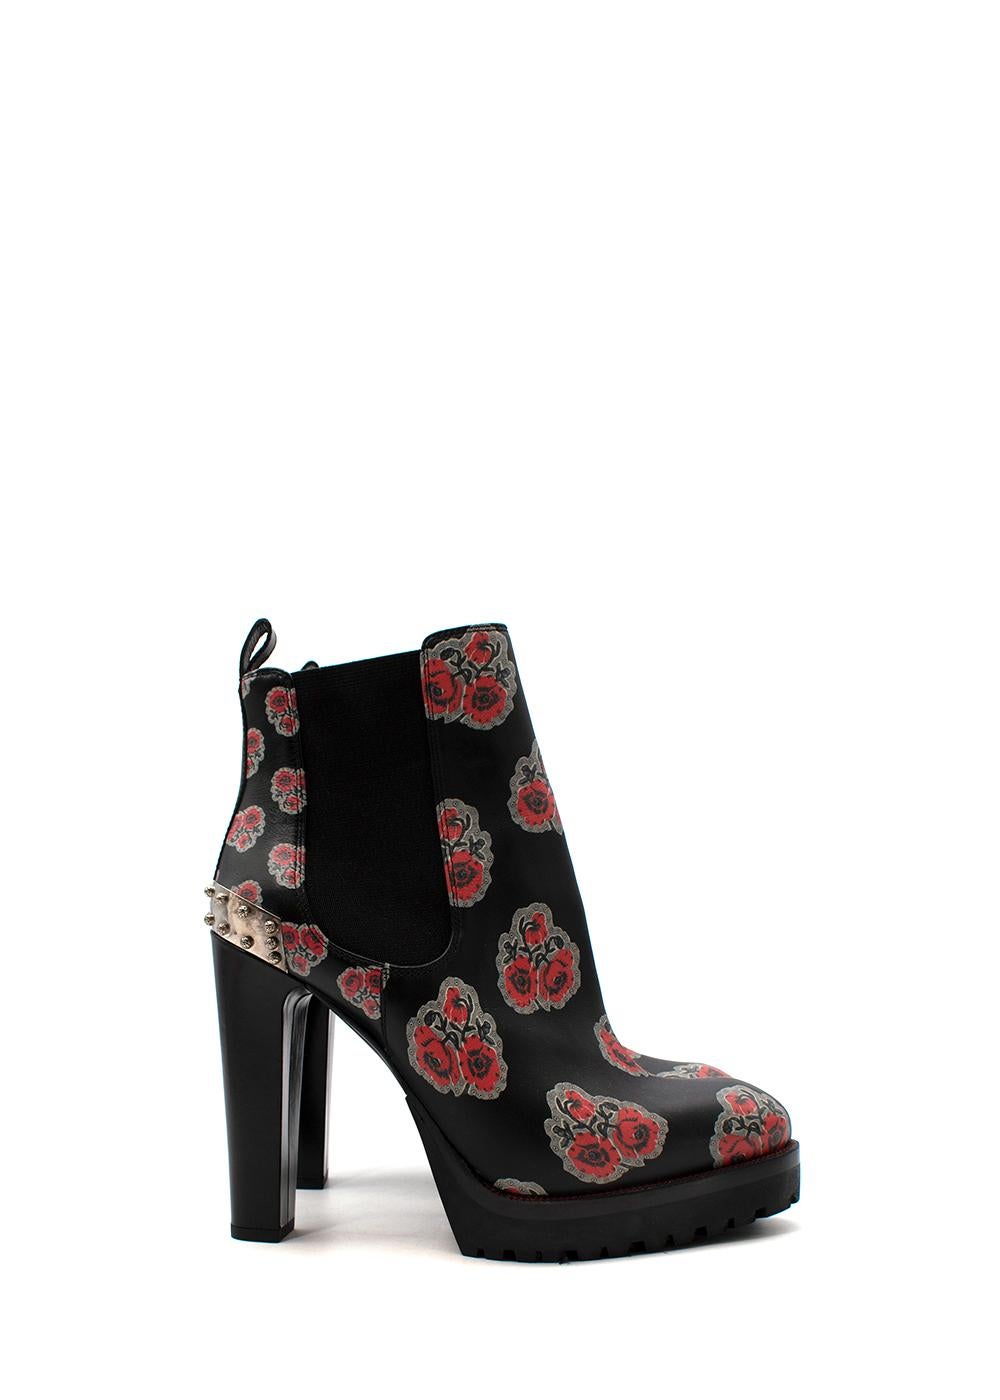 Alexander McQueen Poppy Print Leather Platform Heeled Ankle Bo

- Chelsea style boots with a chunky high heel and gothic-style poppy print
- Stud detailing around the heel 
- Elasticated ankle panel
- Front platform

Material: 
Leather 

Made in